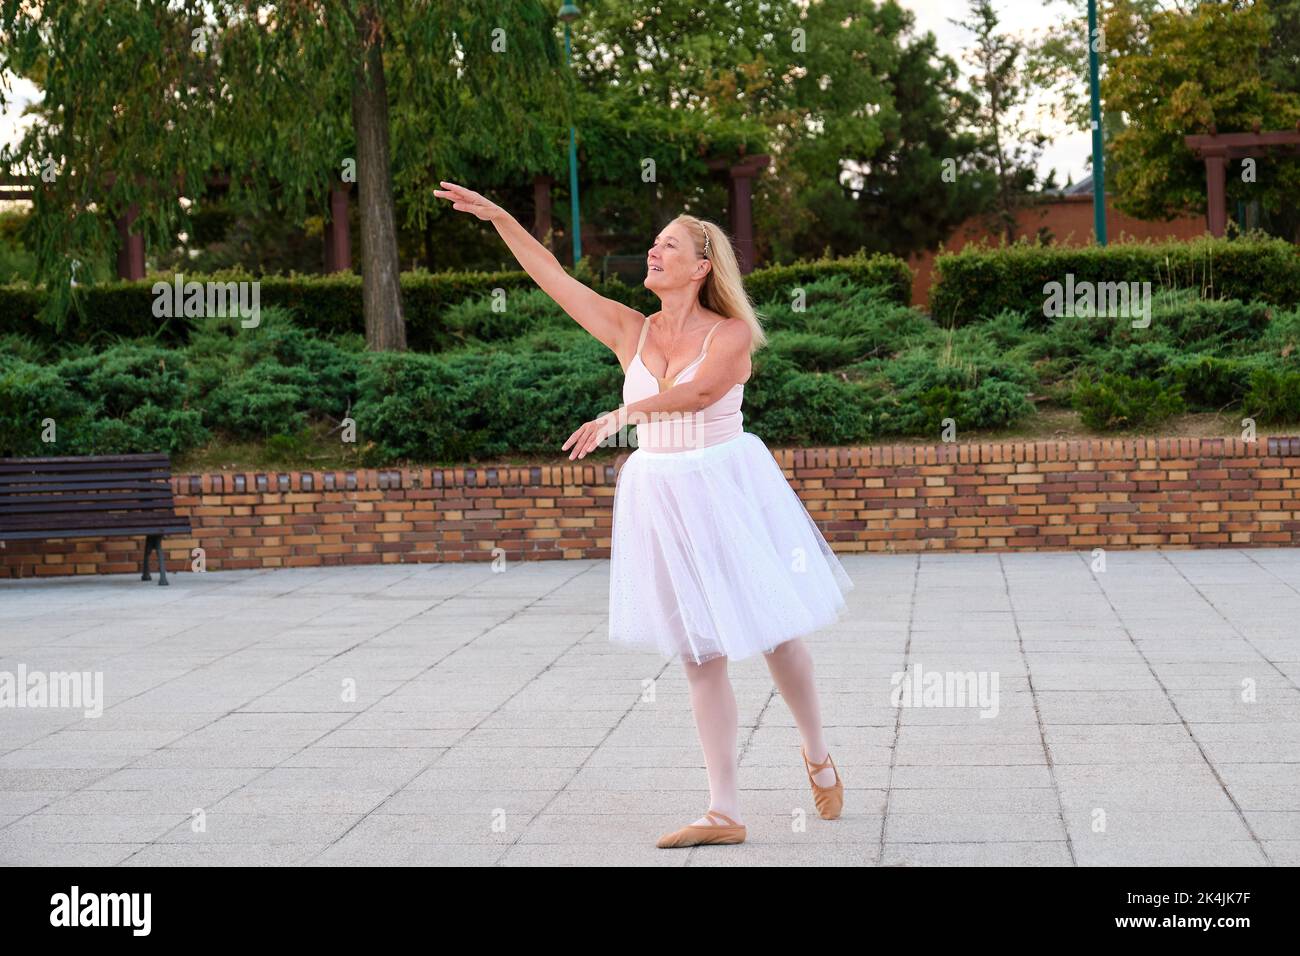 Mature woman dancing ballet in a park at street. Stock Photo